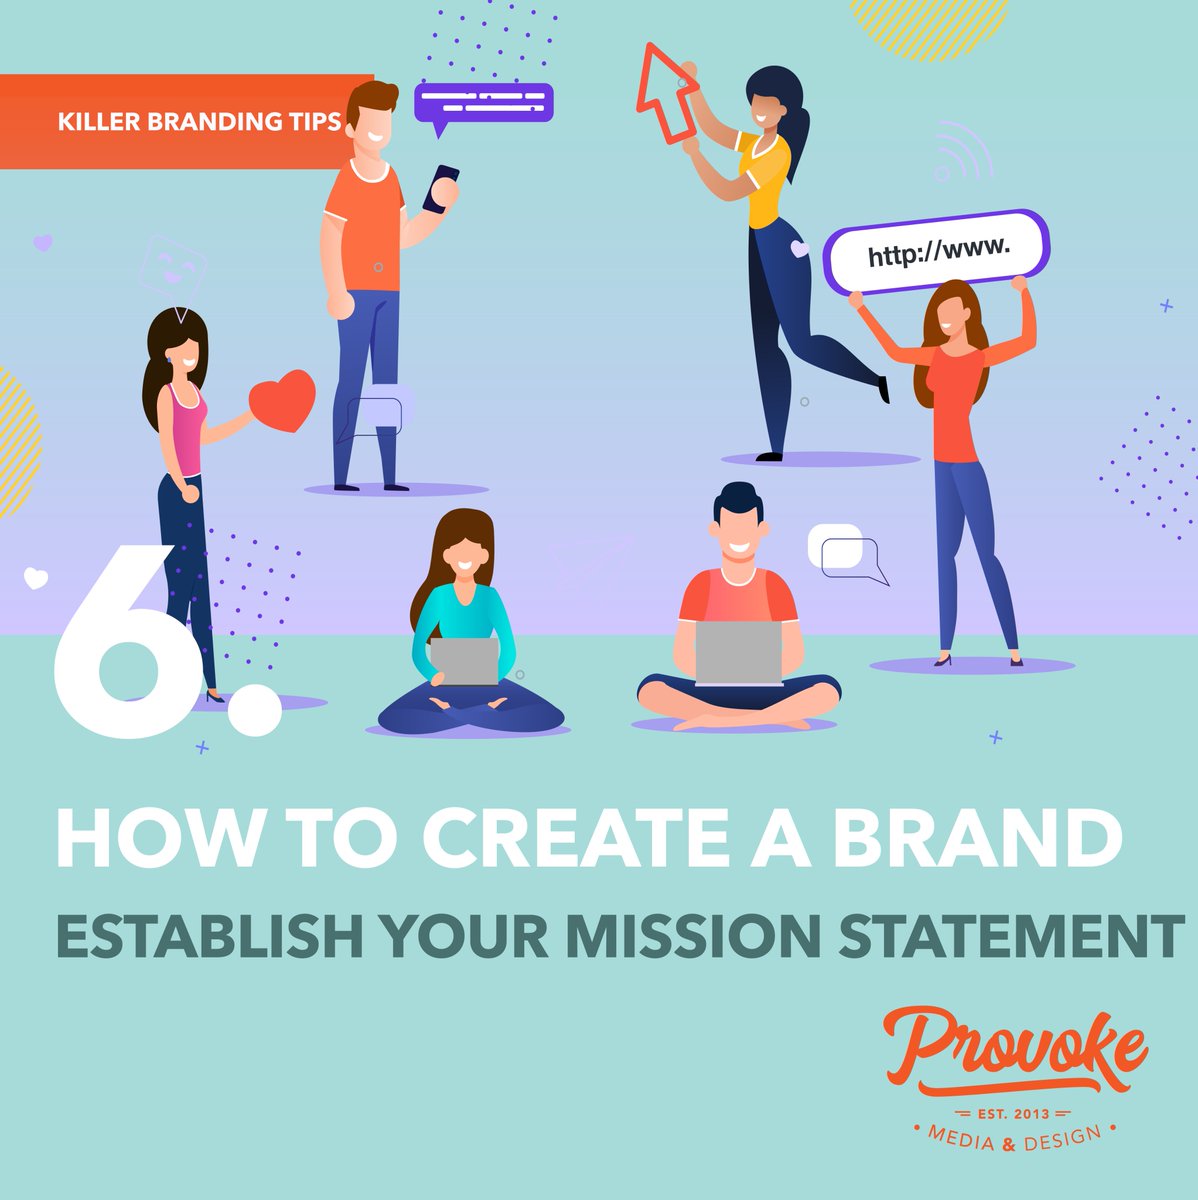 Throwing it back to Killer Branding Tips #6: Establish your mission statement. Your brand's voice is key—it defines who you are and why you exist. Need help? That's why Provoke is here. Let us help you be heard. Visit: getprovoked.ca #getprovoked #Brand #Branding101 #TBT